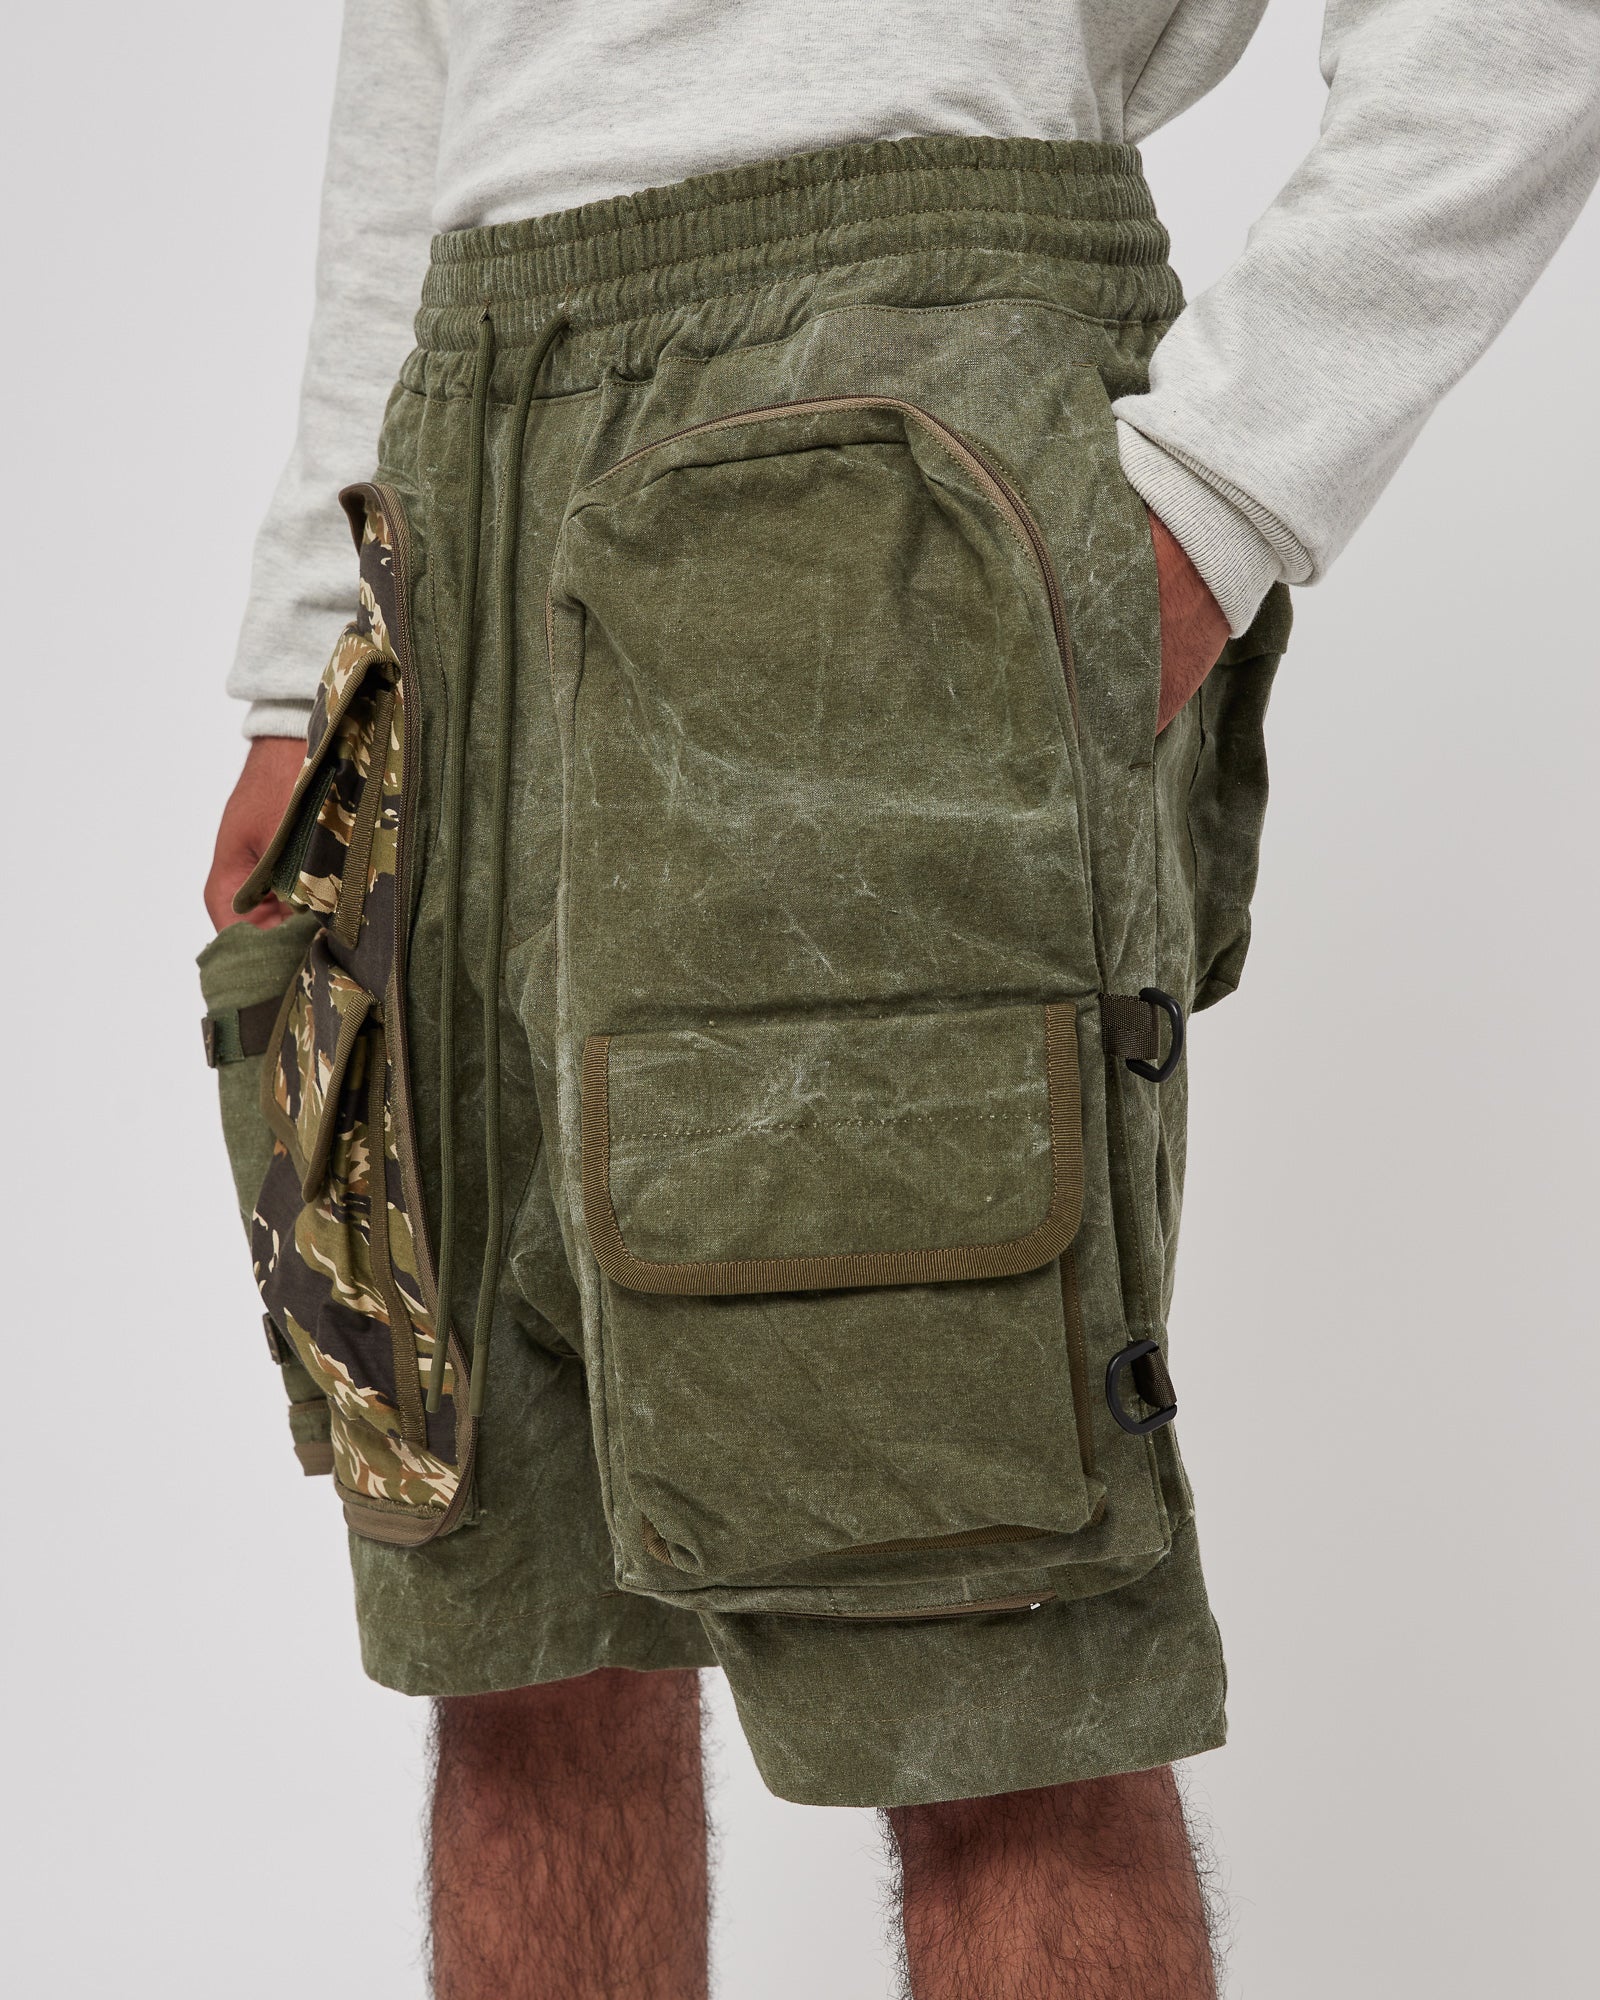 Tactical Shorts in Green